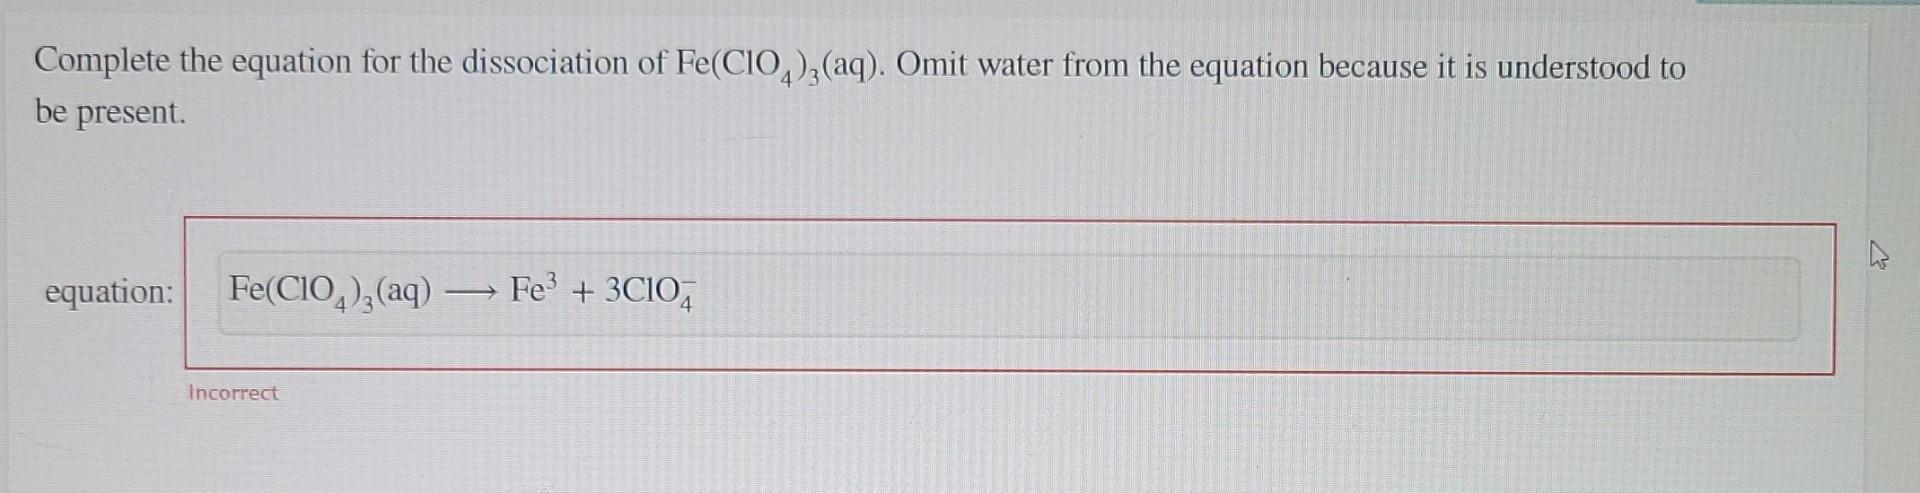 Complete this equation for the dissociation of Fe(ClO4)3(aq). Omit water from the equation because it is understood to be present.?